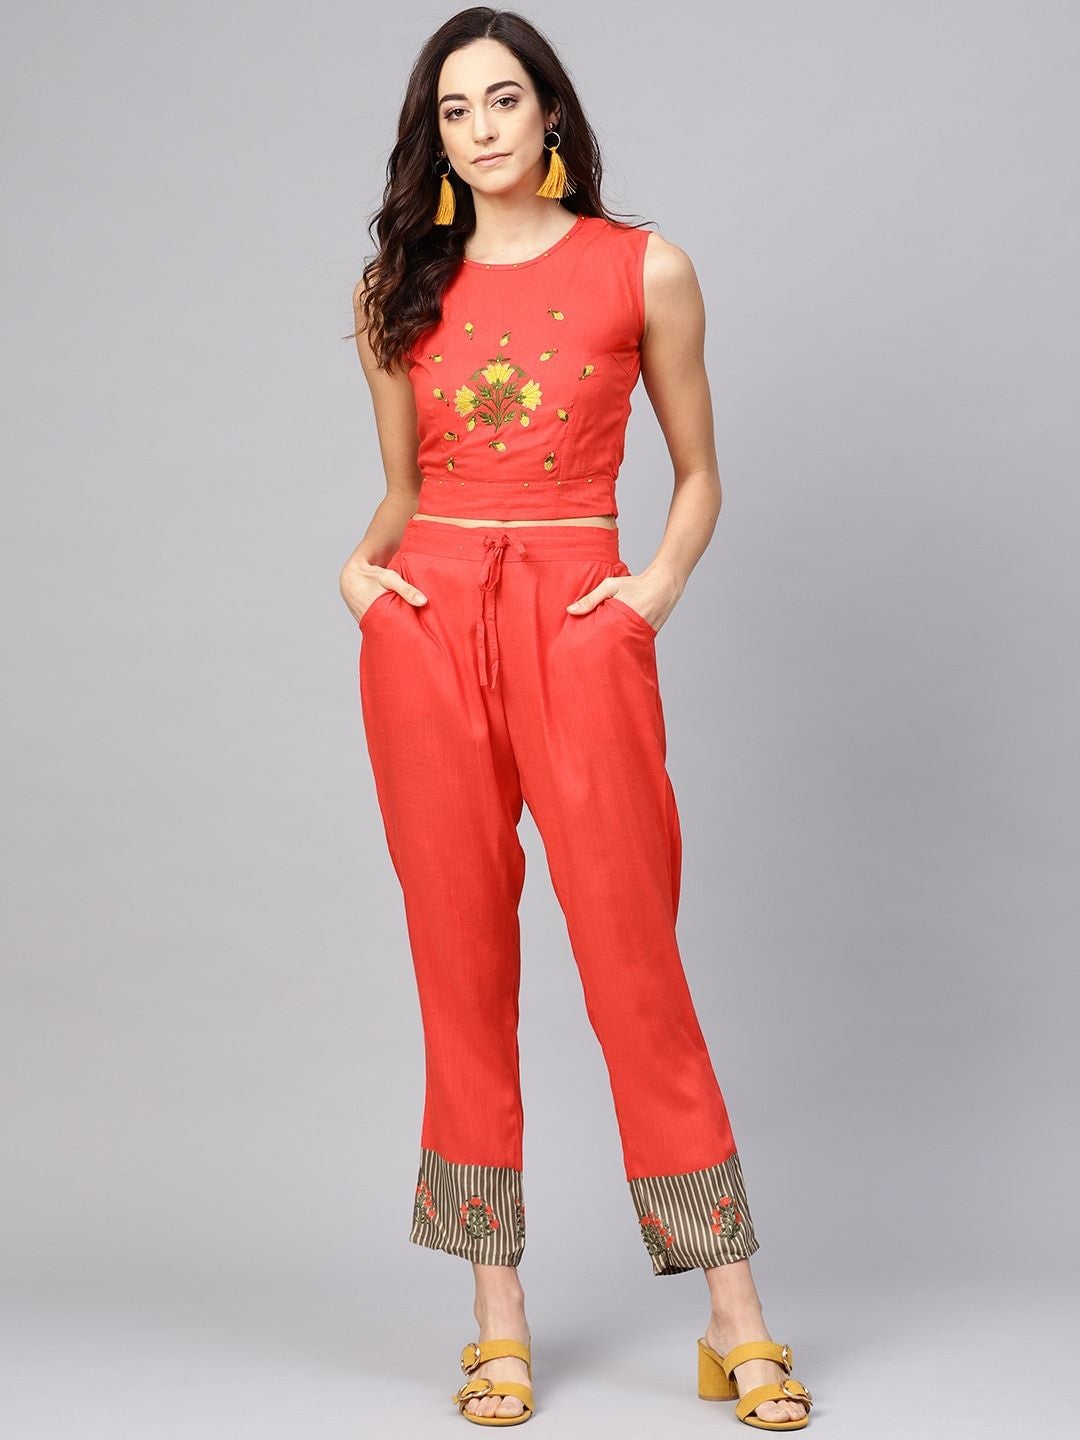 Women's Coral Orange Embroidered Crop Top with Trousers & Ehtnic Jacket - Meeranshi